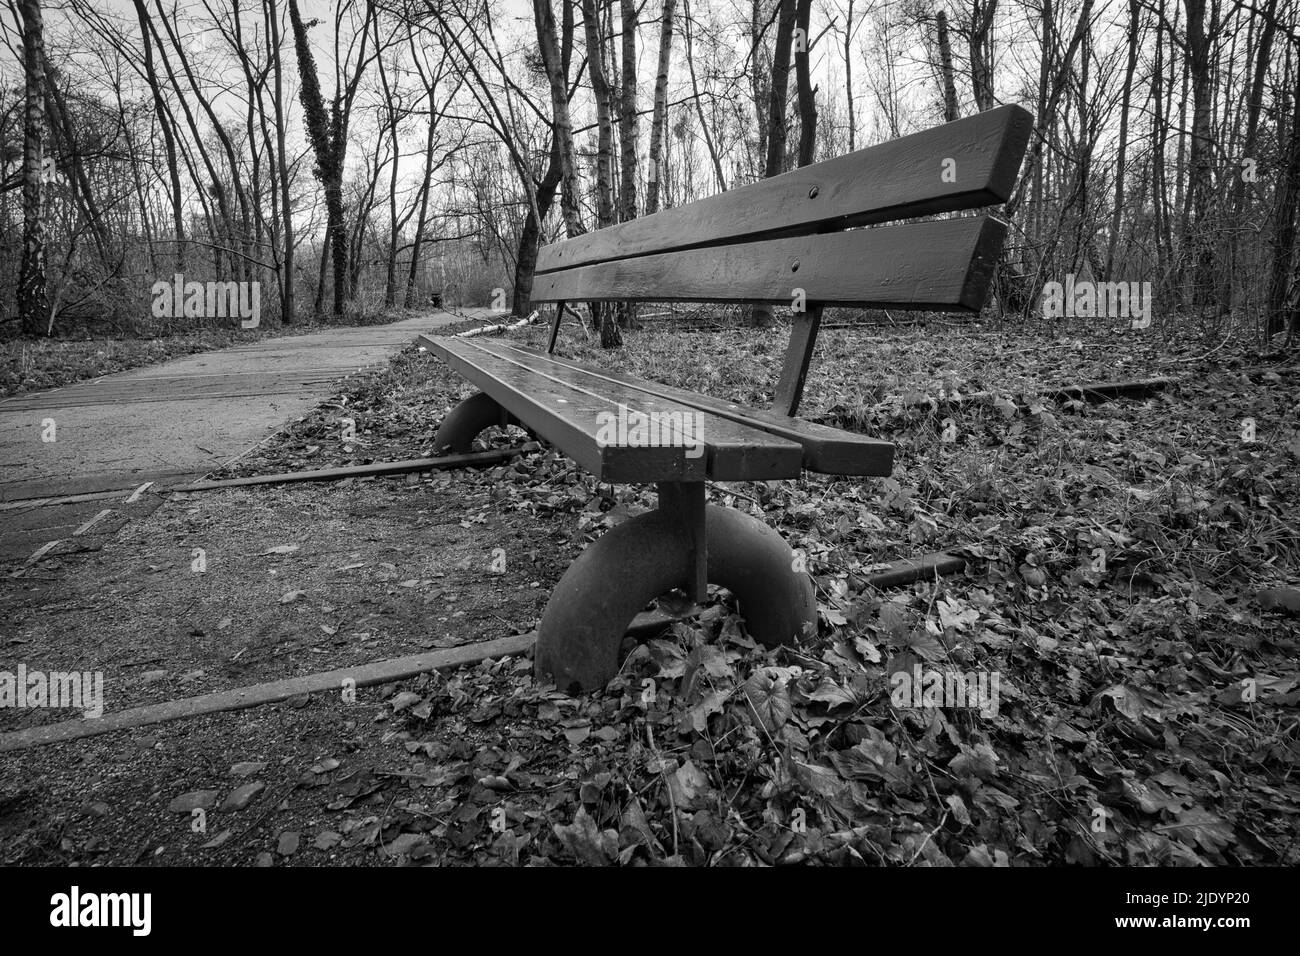 Wooden park bench in black and white over abandoned railroad tracks in a park in autumn. Lonely enjoy the peace and quiet in nature. Still life photo. Stock Photo